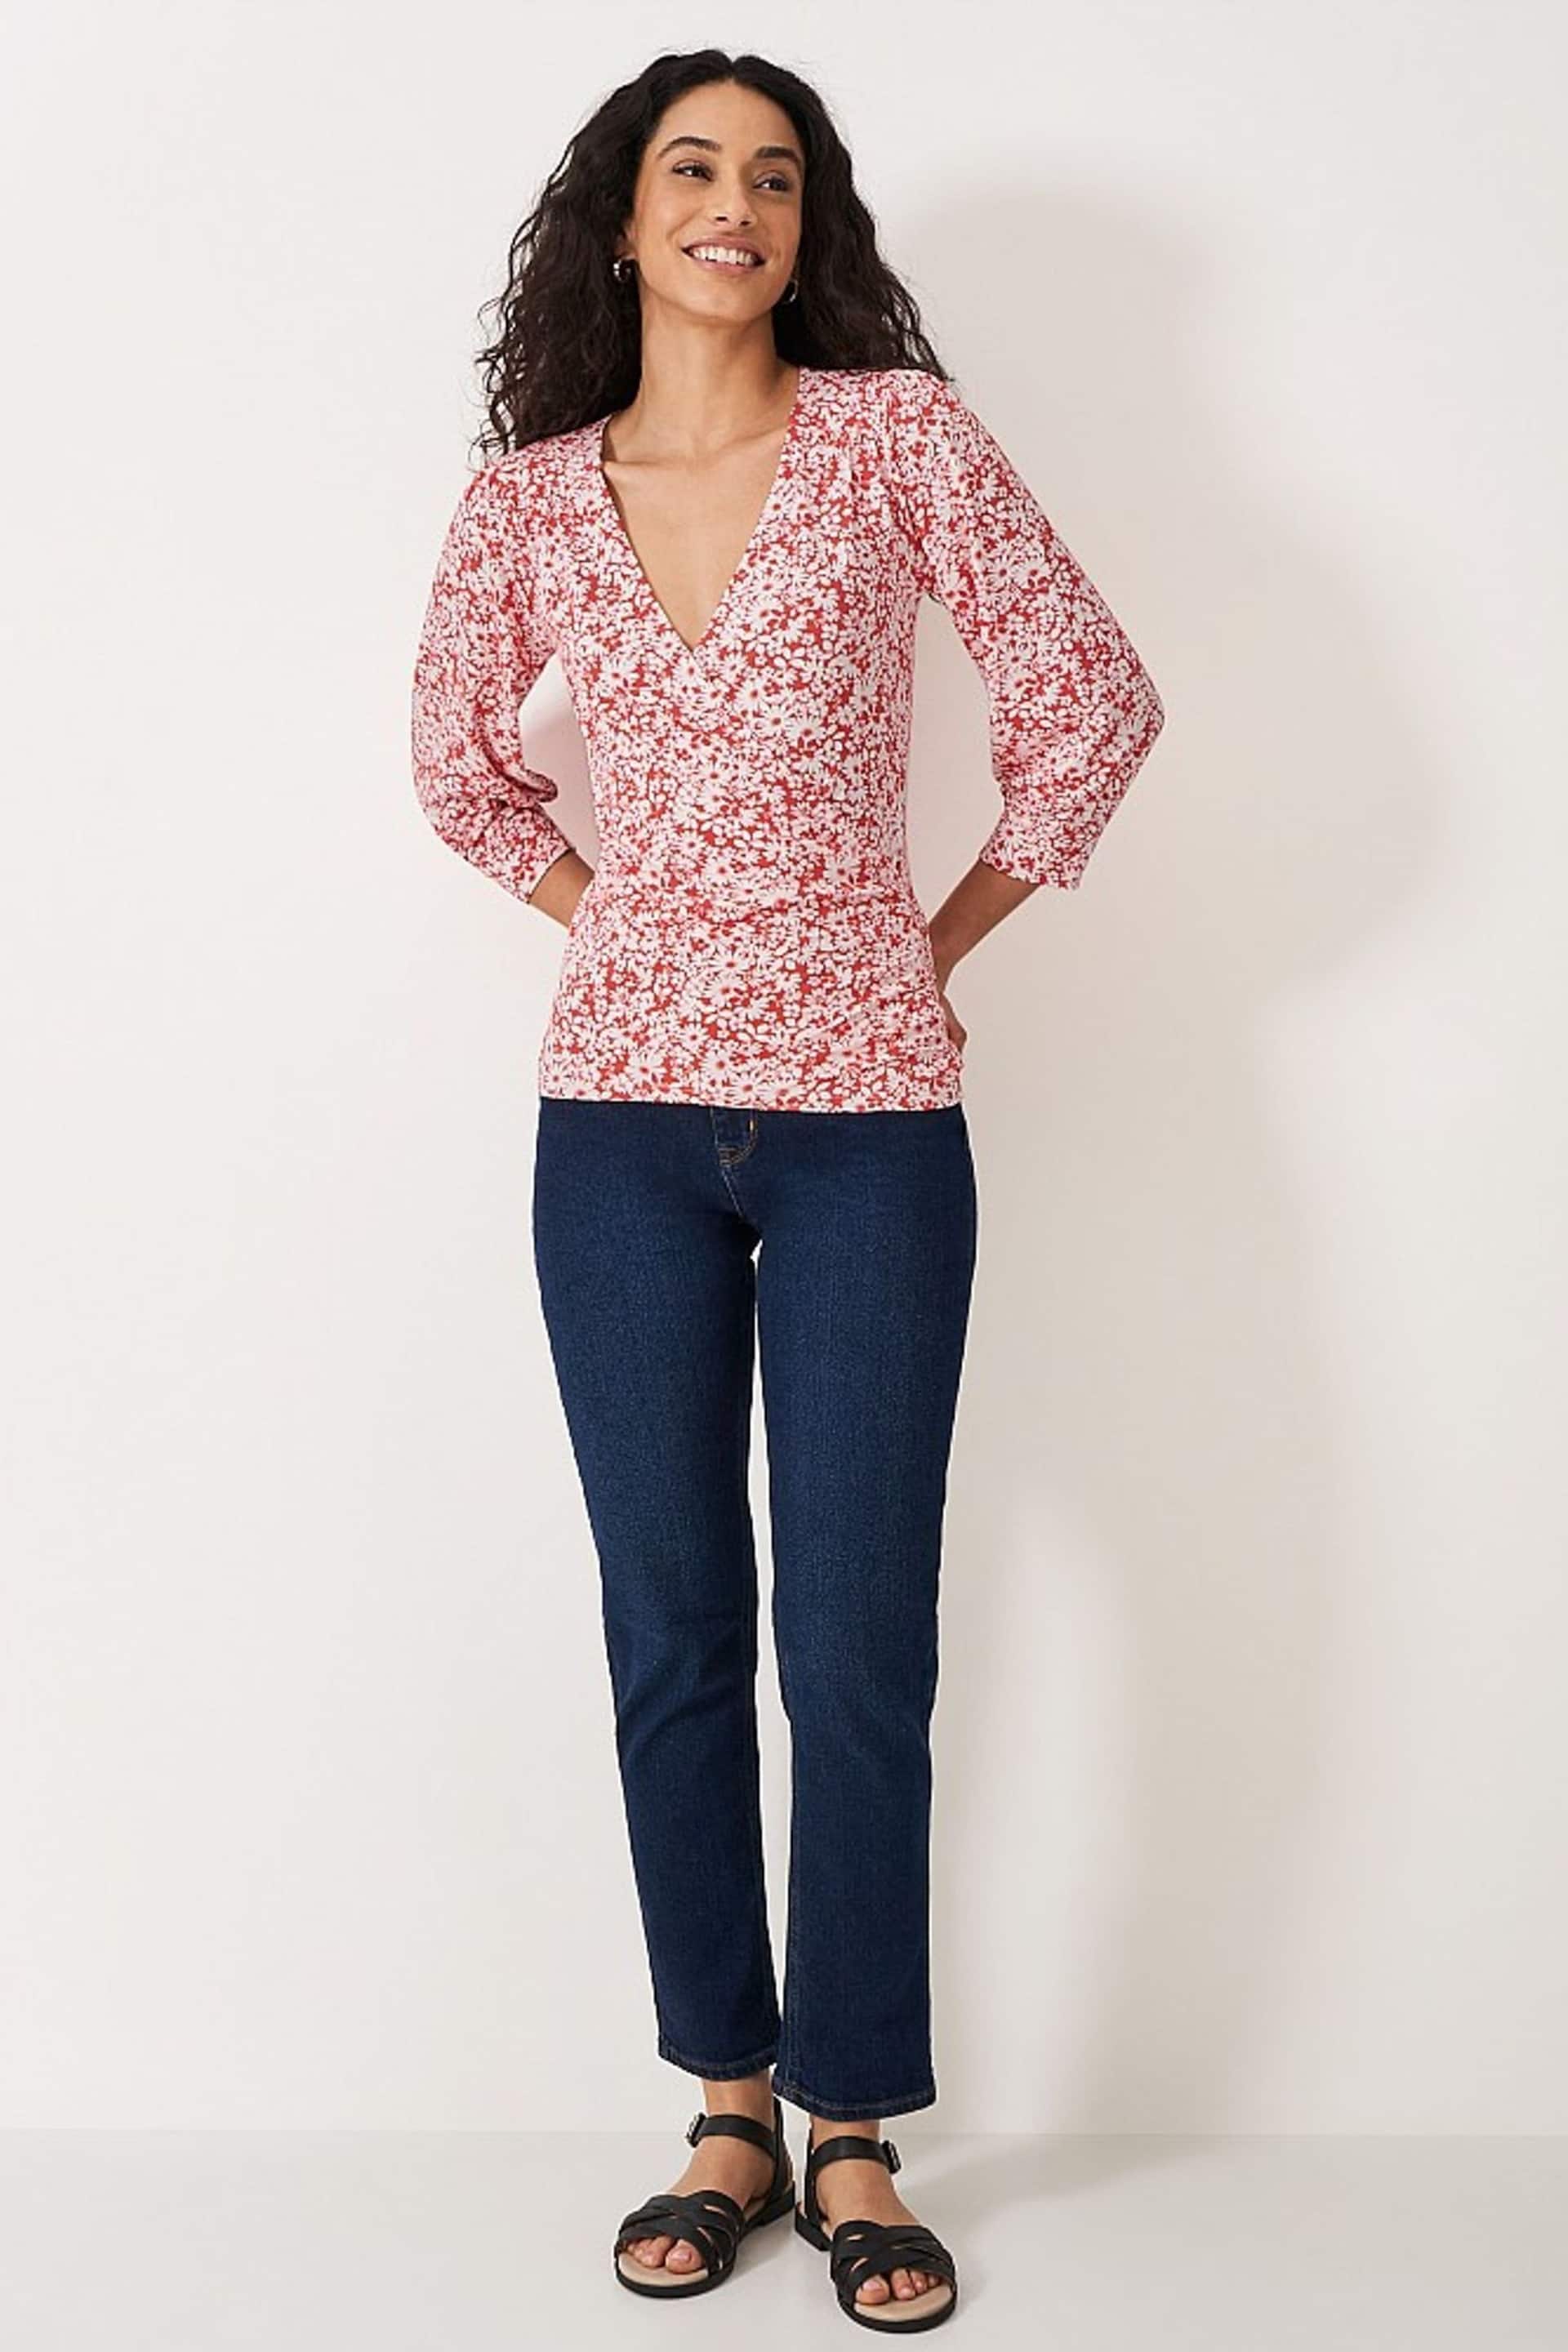 Crew Clothing Company Red Plain Viscose Casual Blouse - Image 2 of 4